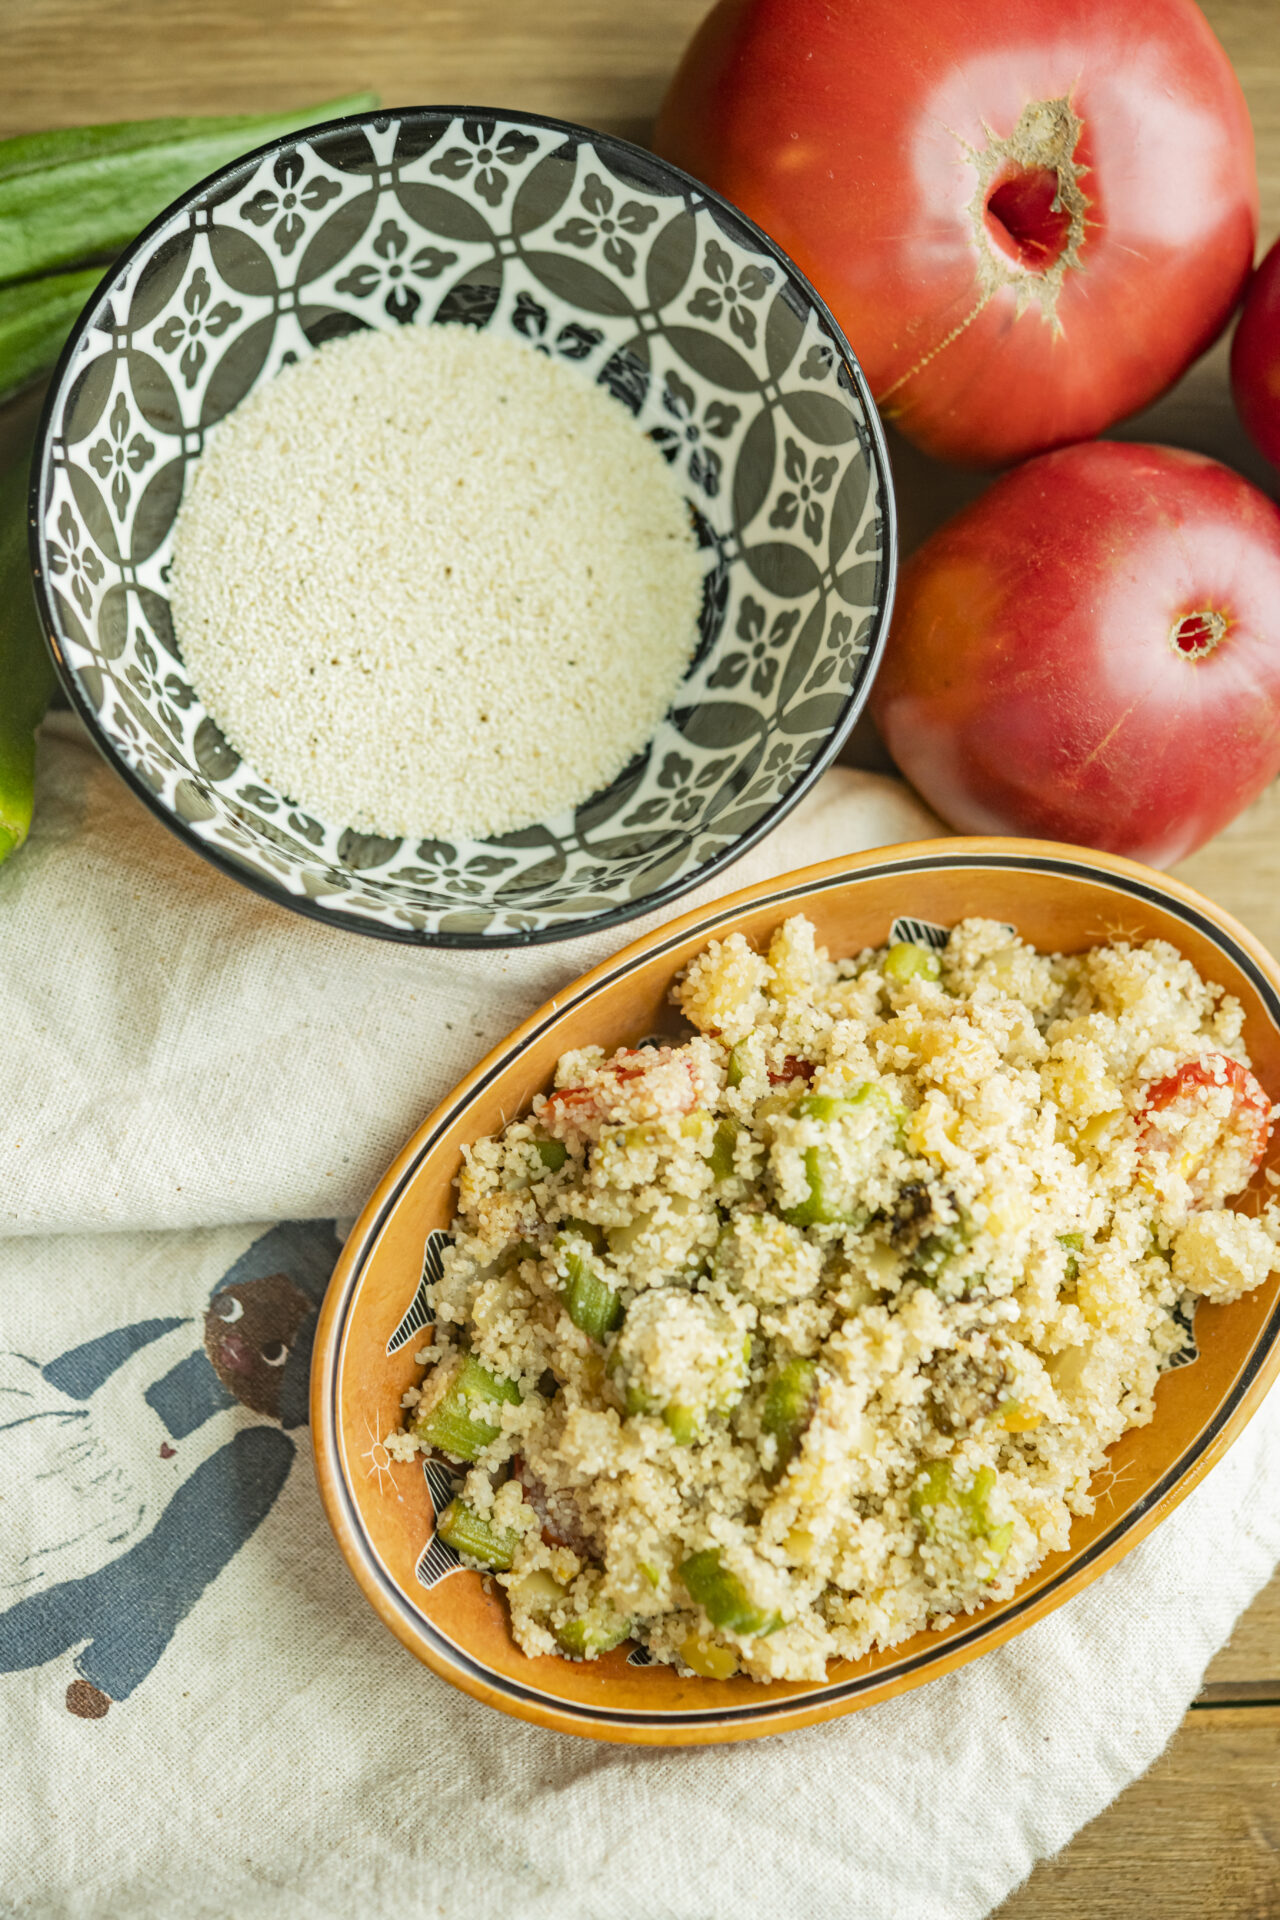 BJ Dennis shares his recipe for fonio pilaf, cooked from ancient fonio grains alongside heirloom tomatoes.